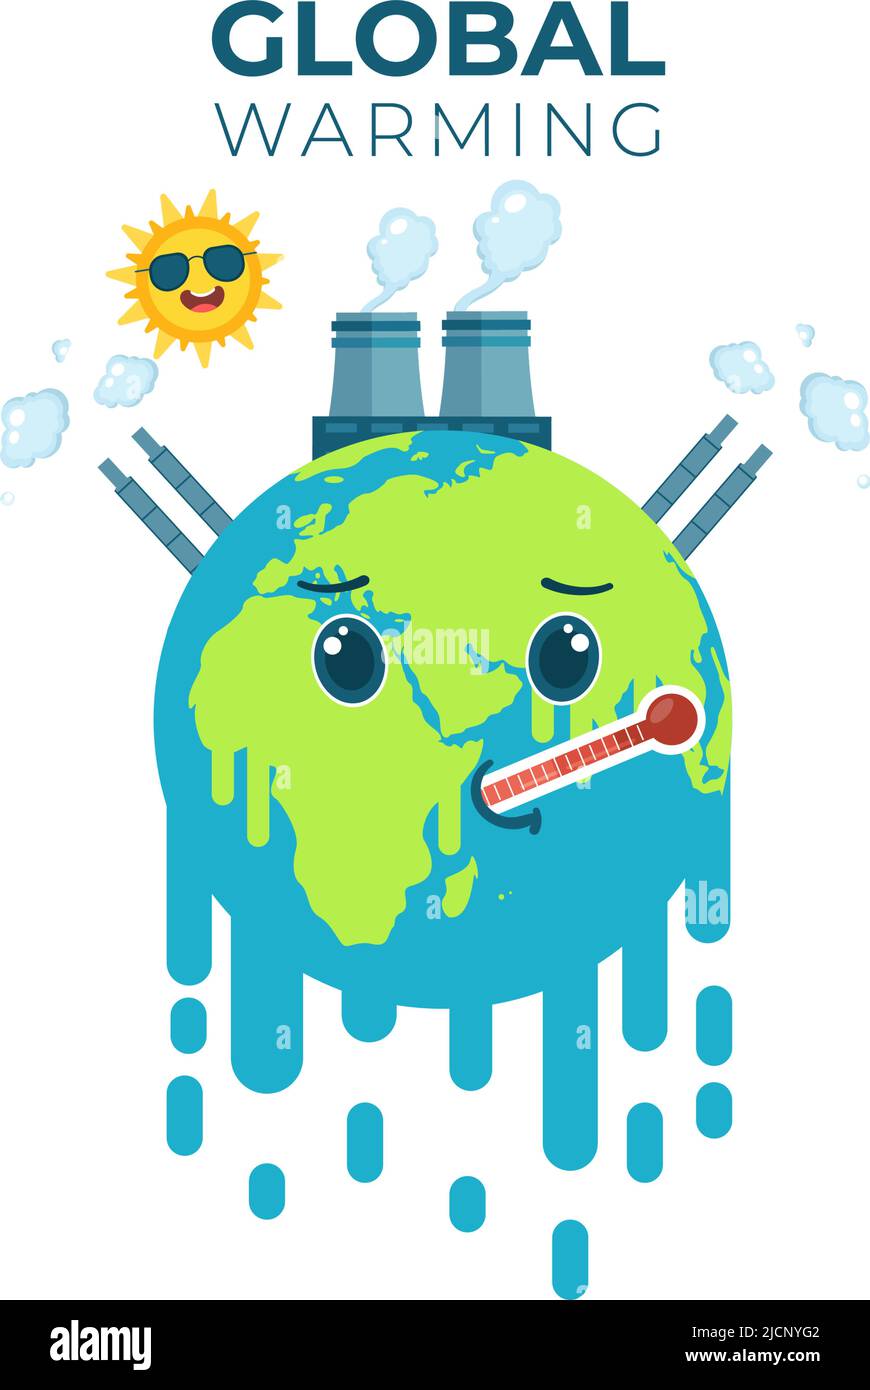 Global Warming Cartoon Style Illustration with Planet Earth in a Melting or  Burning State and Image Sun to Prevent Damage to Nature and Climate Change  Stock Vector Image & Art - Alamy